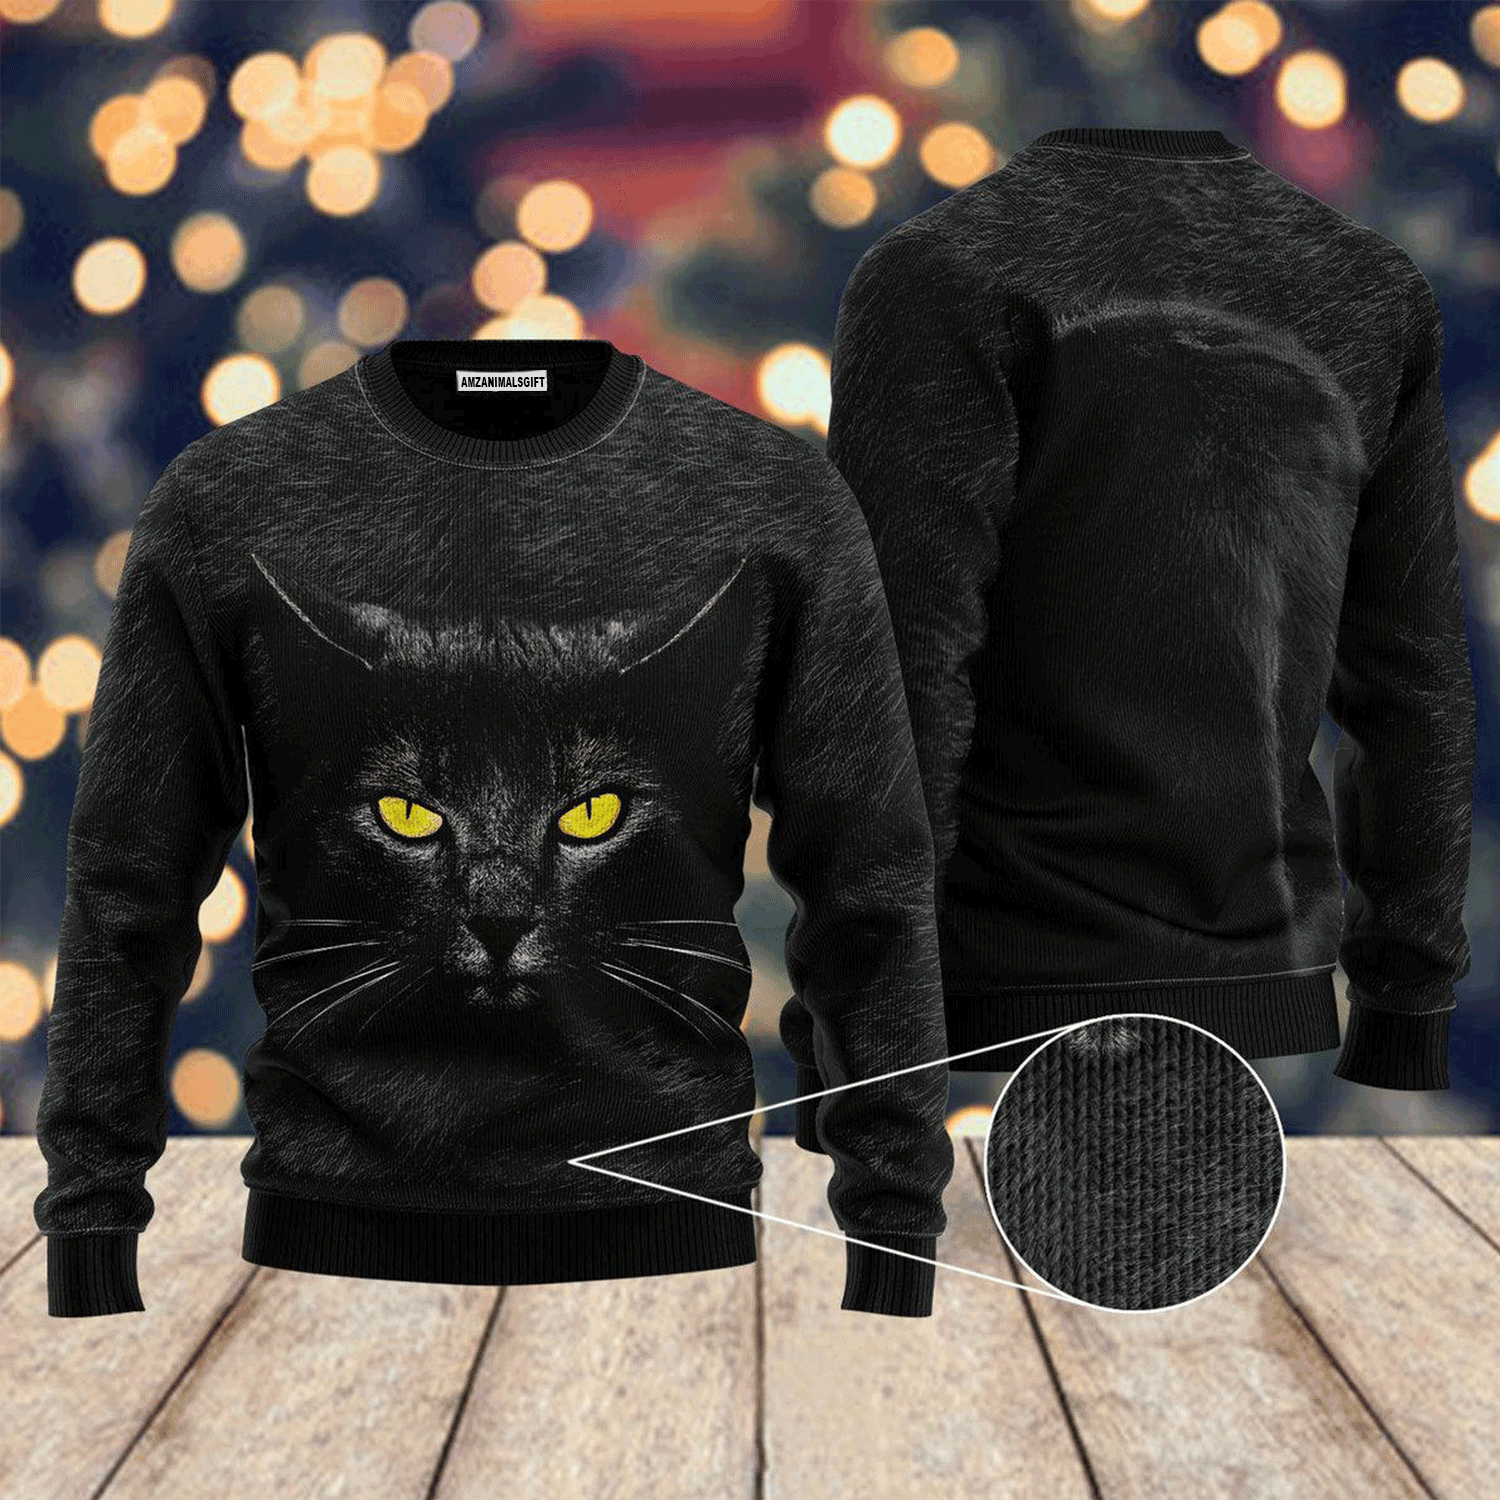 Awesome Black Cat Sweater, Ugly Christmas Sweater For Men & Women, Perfect Outfit For Christmas New Year Autumn Winter